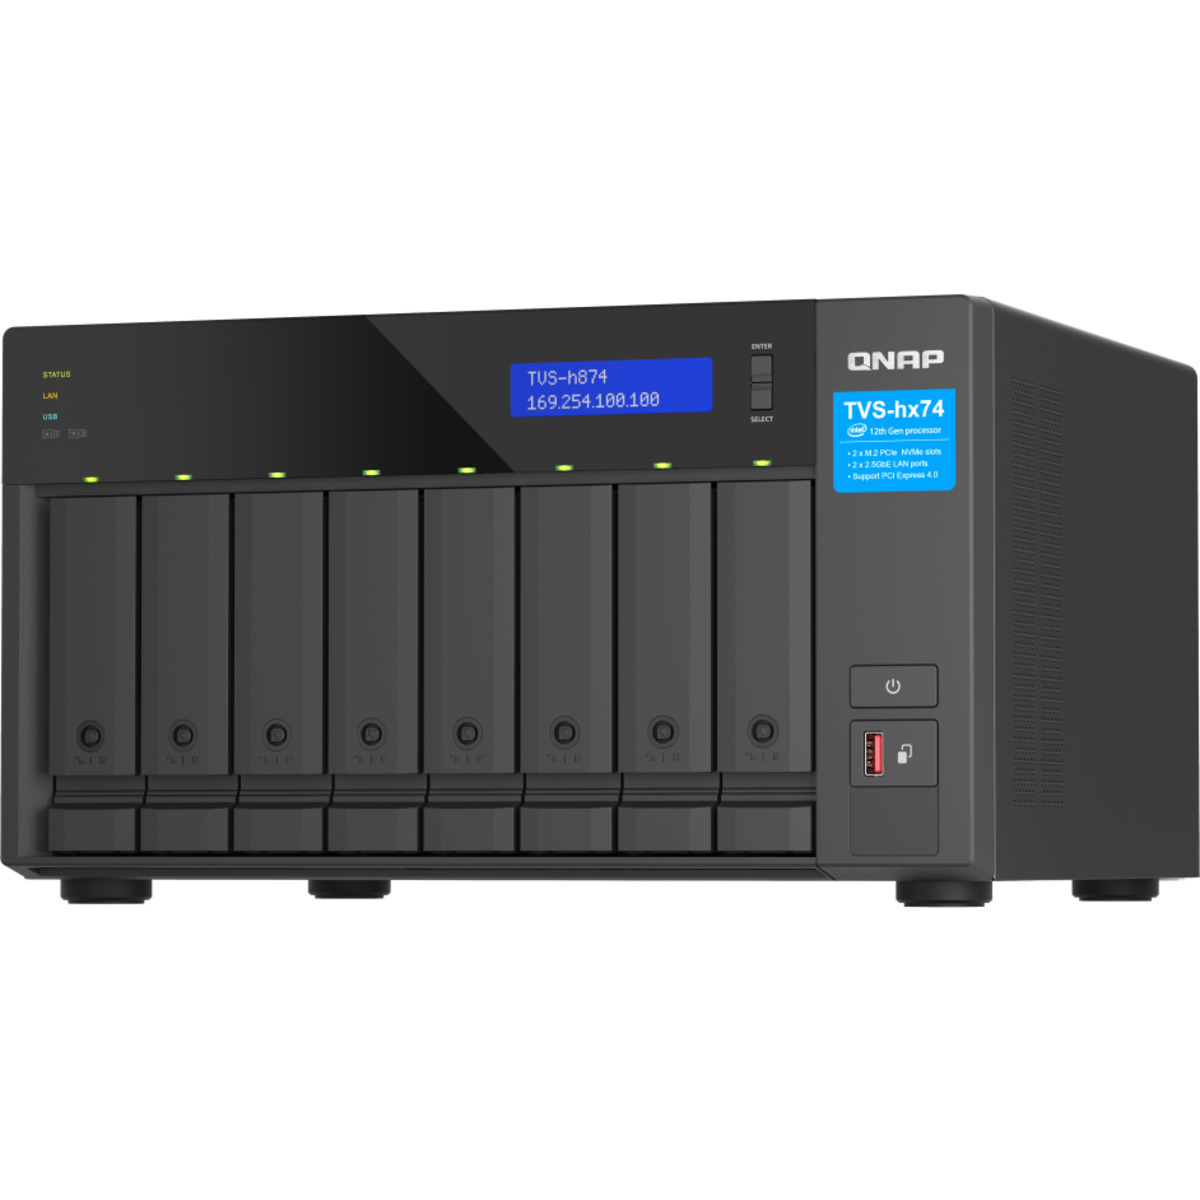 QNAP TVS-h874 Core i7 100tb 8-Bay Desktop Multimedia / Power User / Business NAS - Network Attached Storage Device 5x20tb Toshiba Enterprise Capacity MG10ACA20TE 3.5 7200rpm SATA 6Gb/s HDD ENTERPRISE Class Drives Installed - Burn-In Tested TVS-h874 Core i7